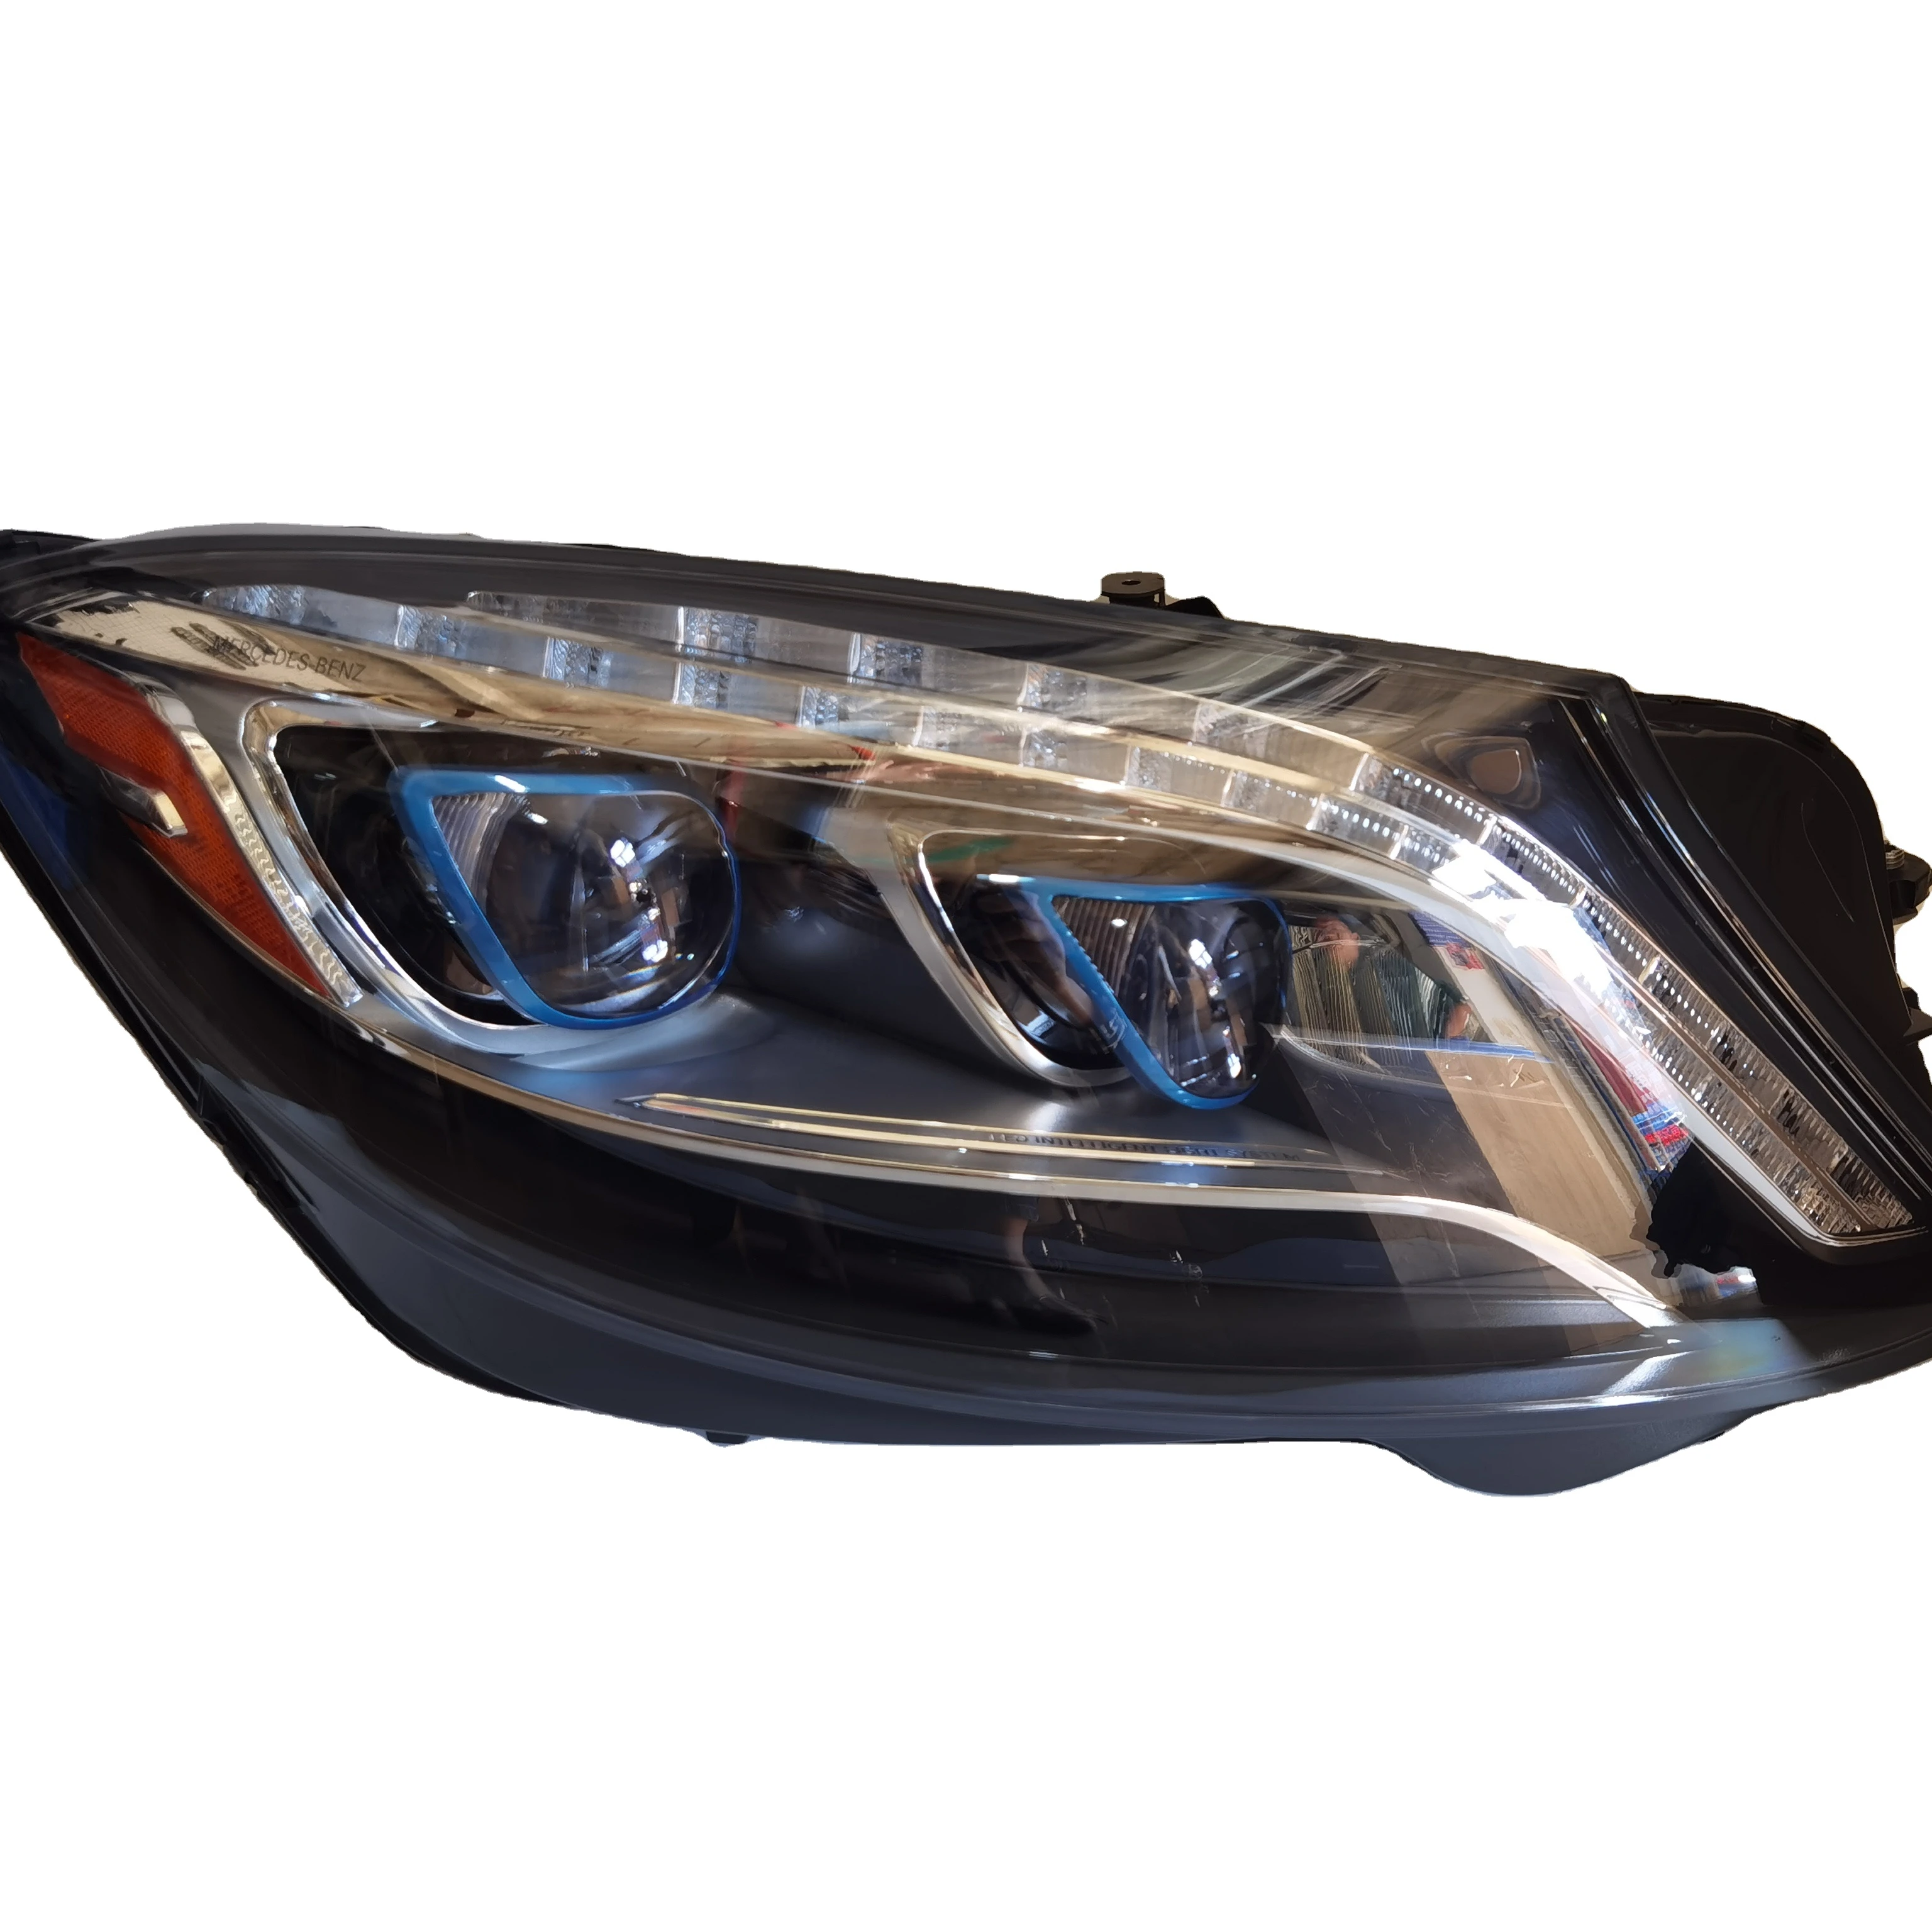 

for Mercedes Benz W222 car car lights led headlight manufacturers to directly sell brand new remanufactured car headlight